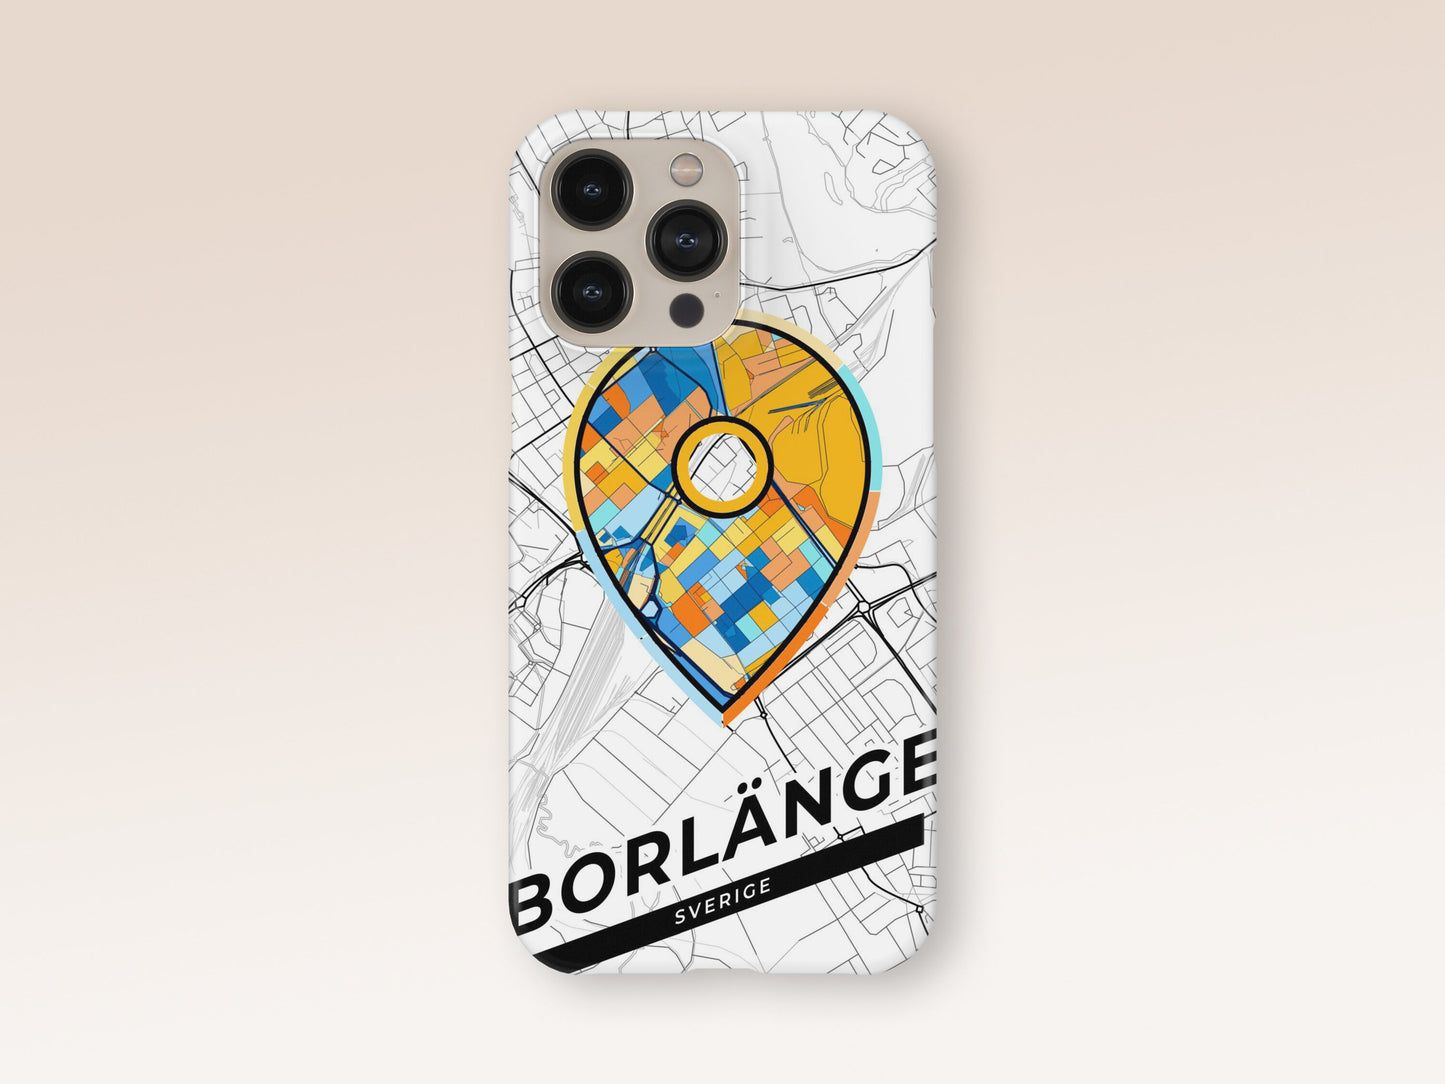 Borlänge Sweden slim phone case with colorful icon. Birthday, wedding or housewarming gift. Couple match cases. 1